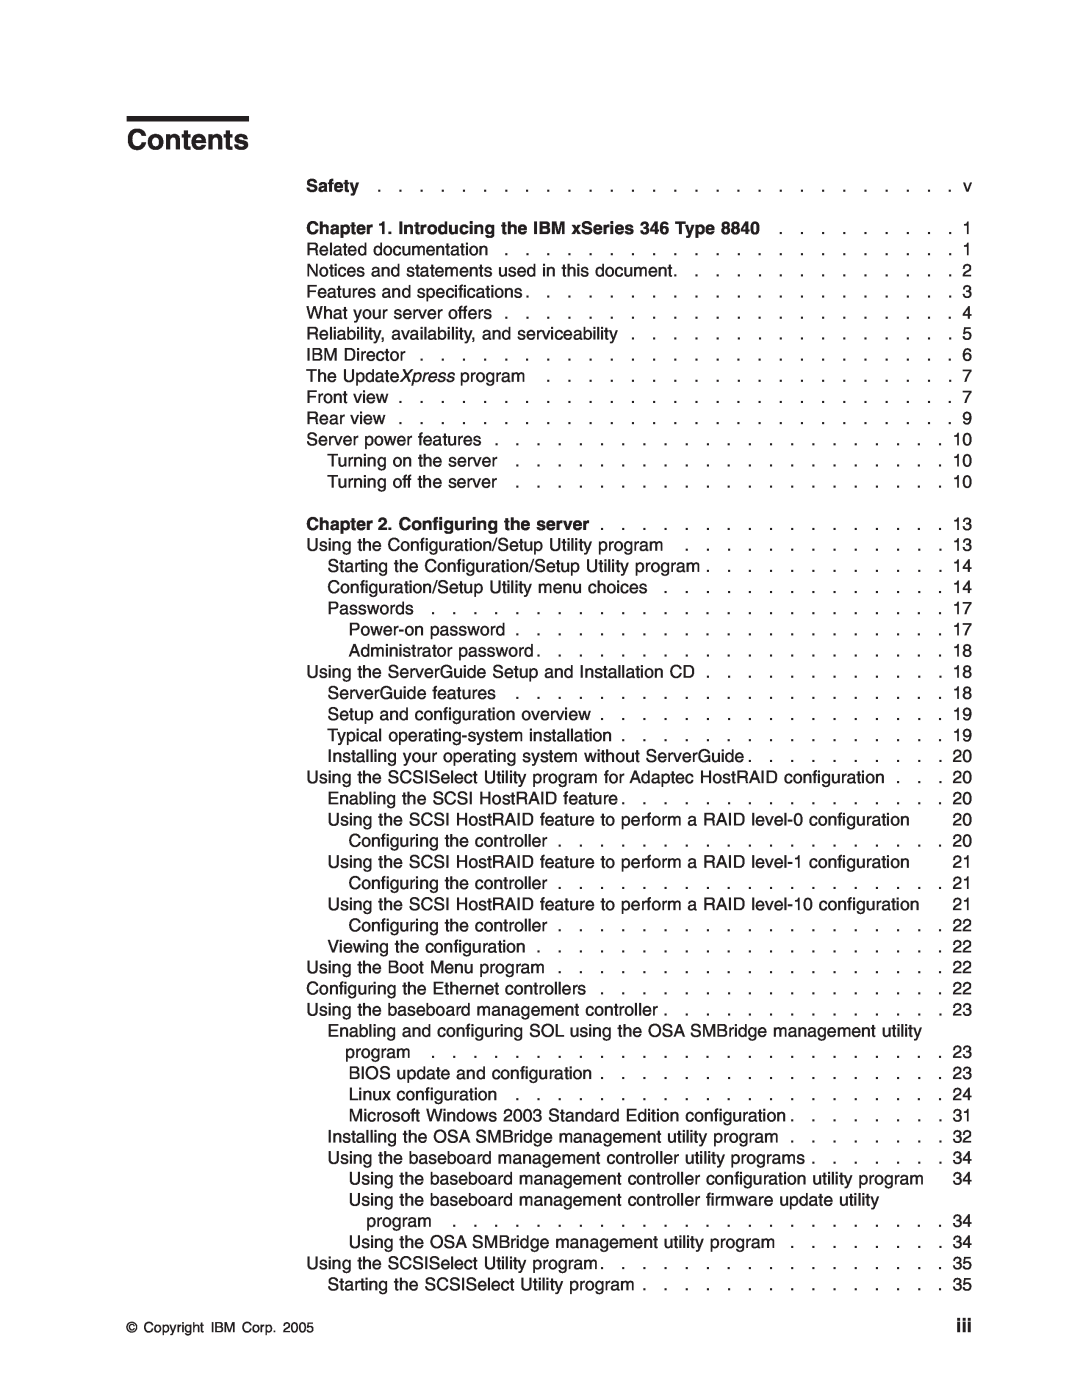 IBM 8840 manual Contents, Introducing the IBM xSeries 346 Type, Configuring the server 